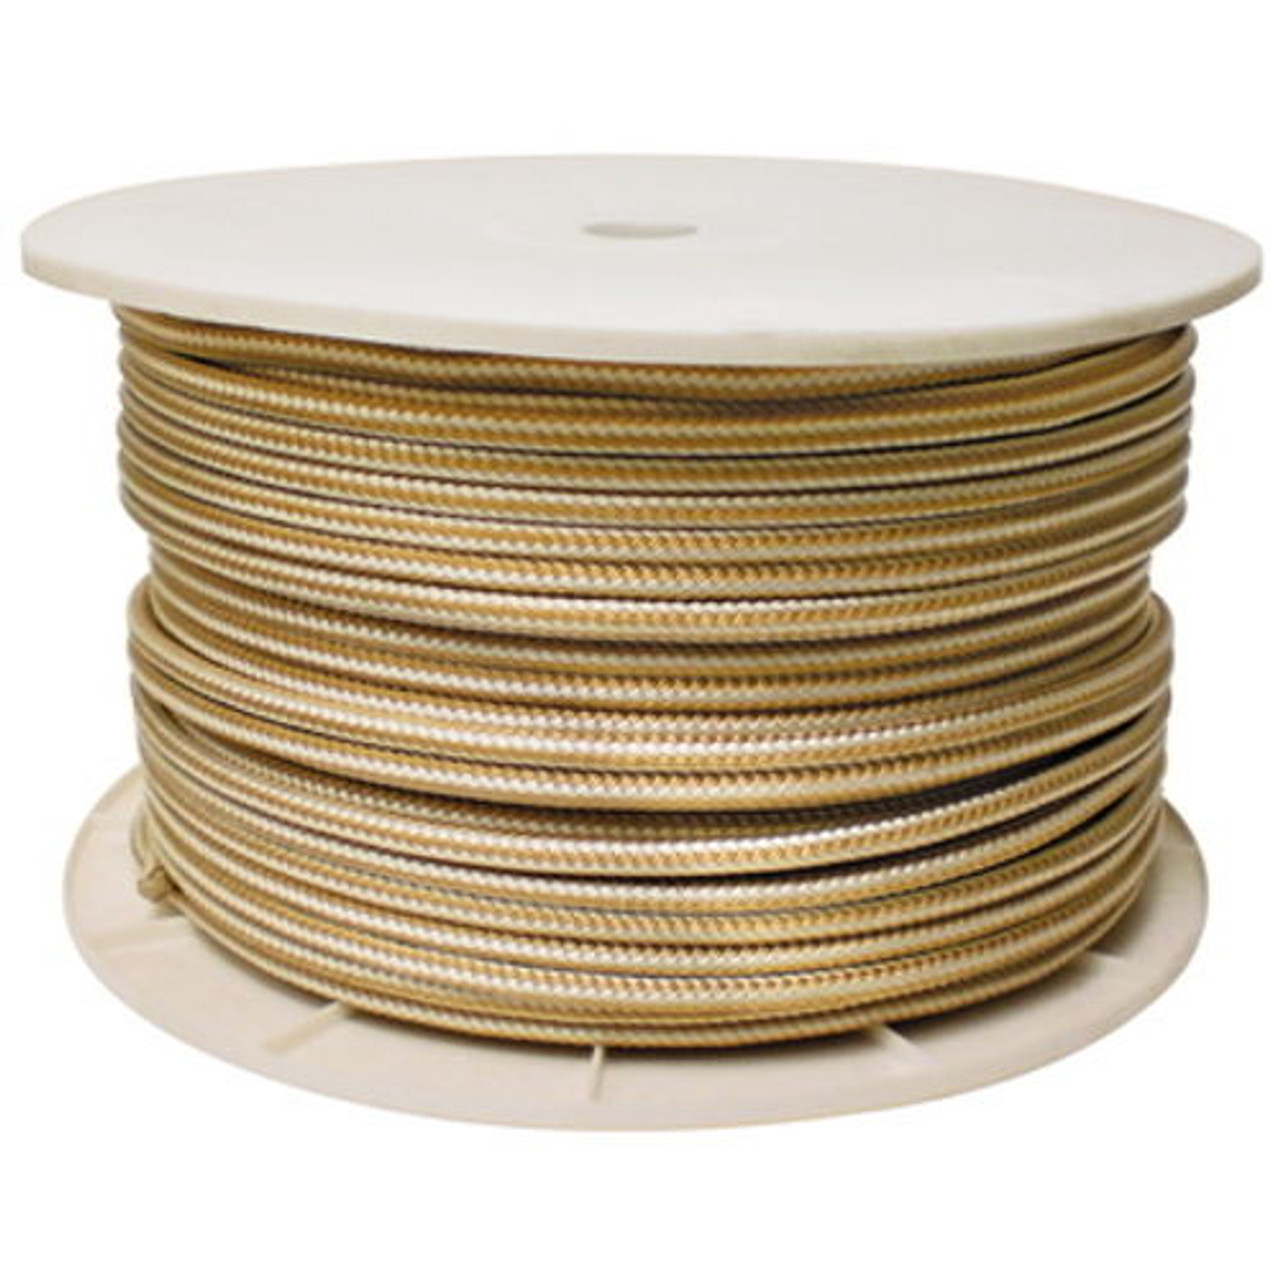 1/2 Inch x 600 Ft Gold and White Double Braid Nylon Rope Spool for Boats